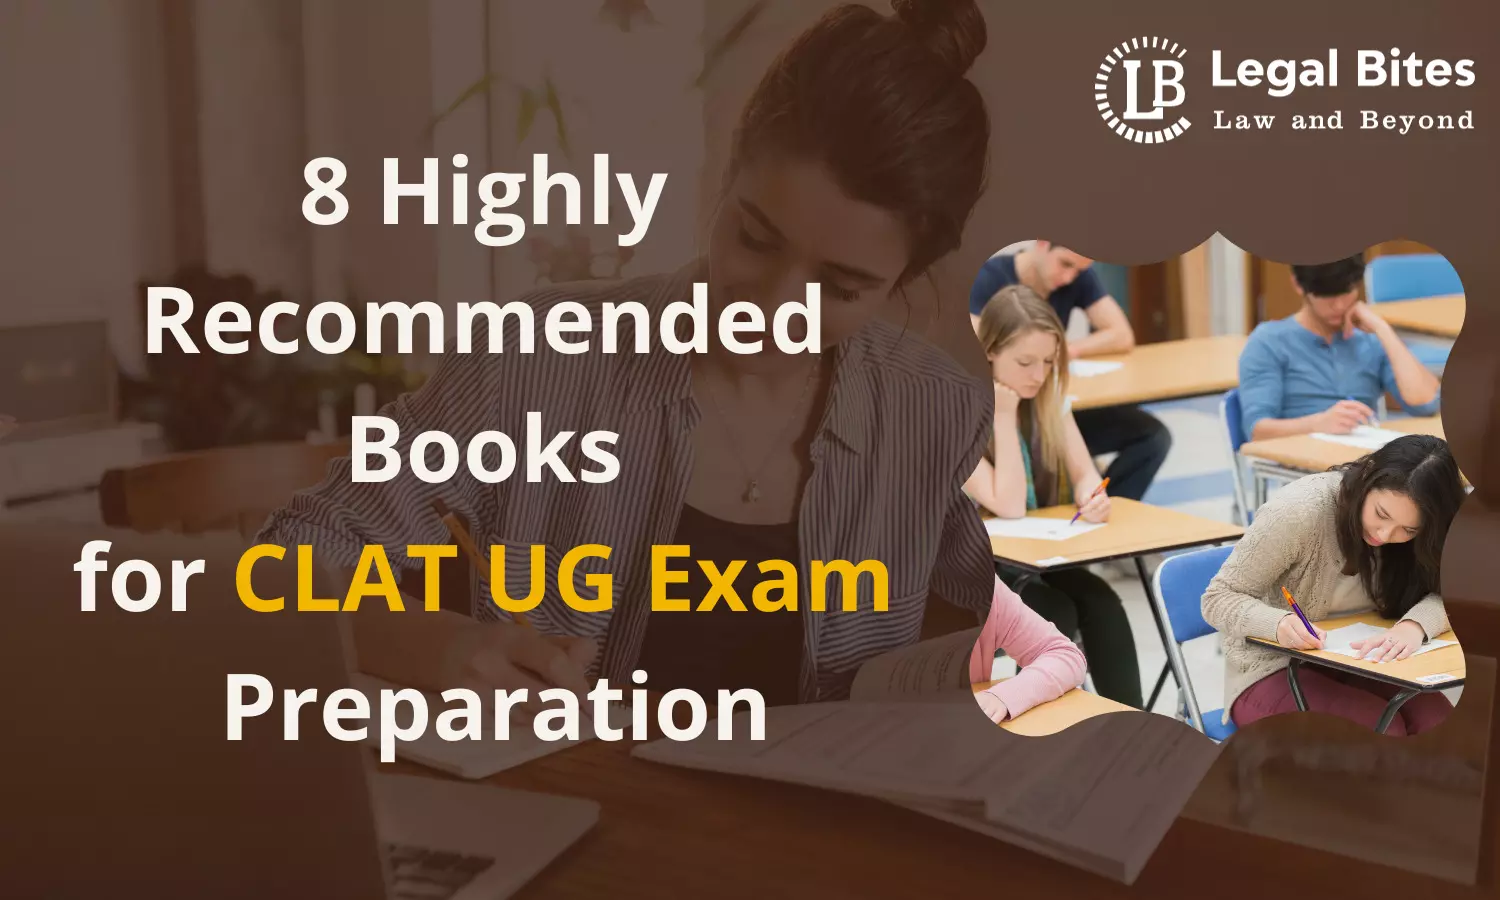 8 Highly Recommended Books for CLAT UG Exam Preparation